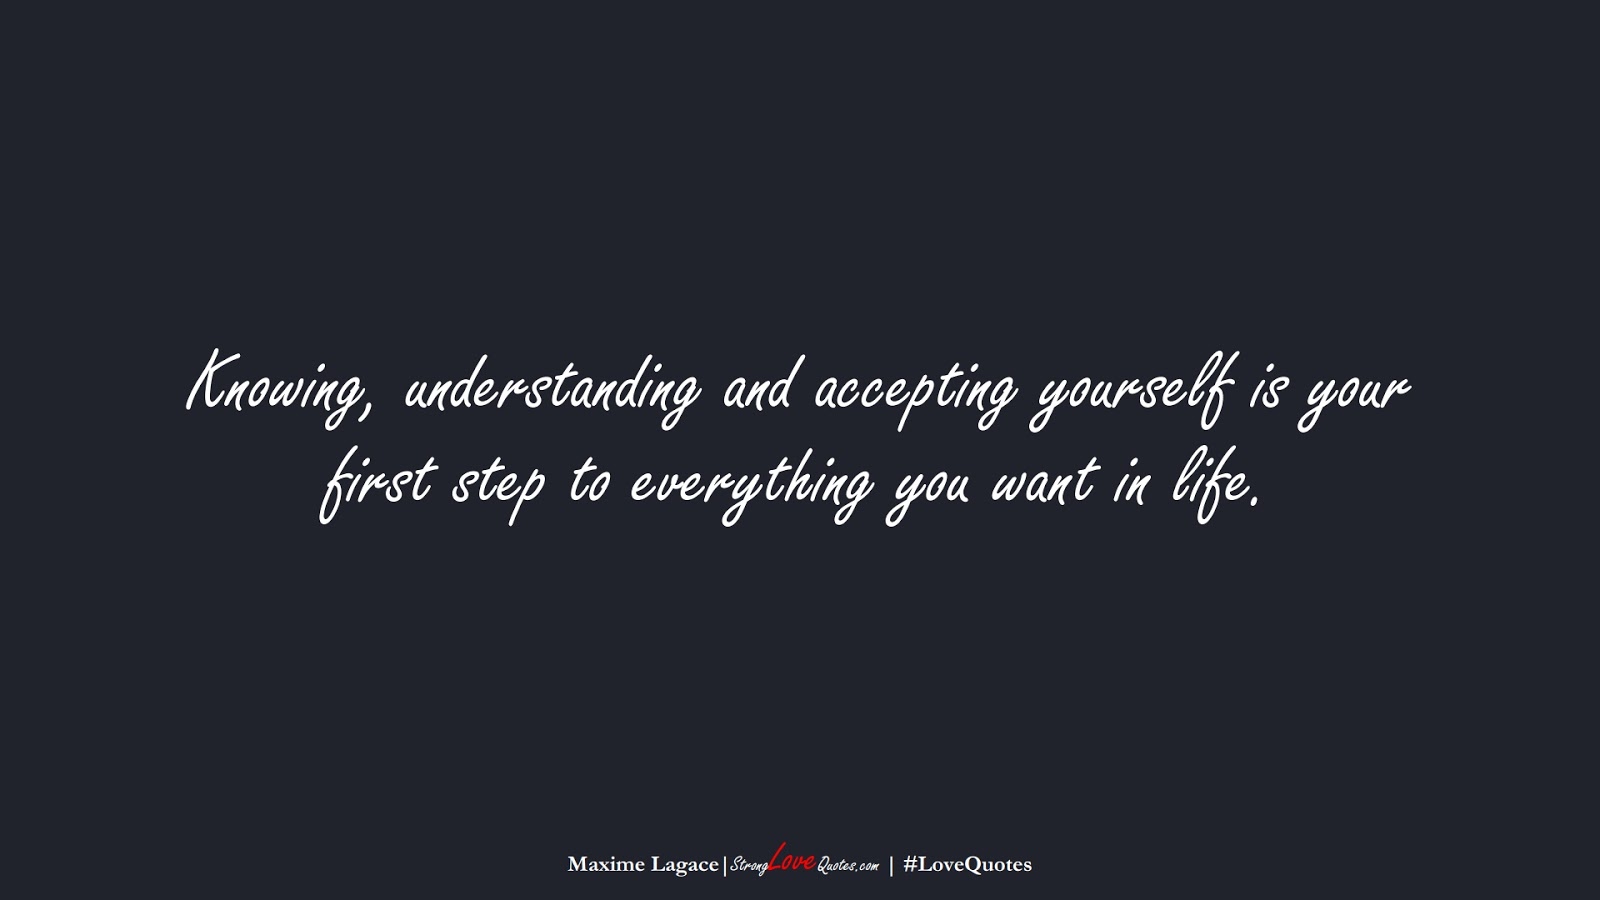 Knowing, understanding and accepting yourself is your first step to everything you want in life. (Maxime Lagace);  #LoveQuotes